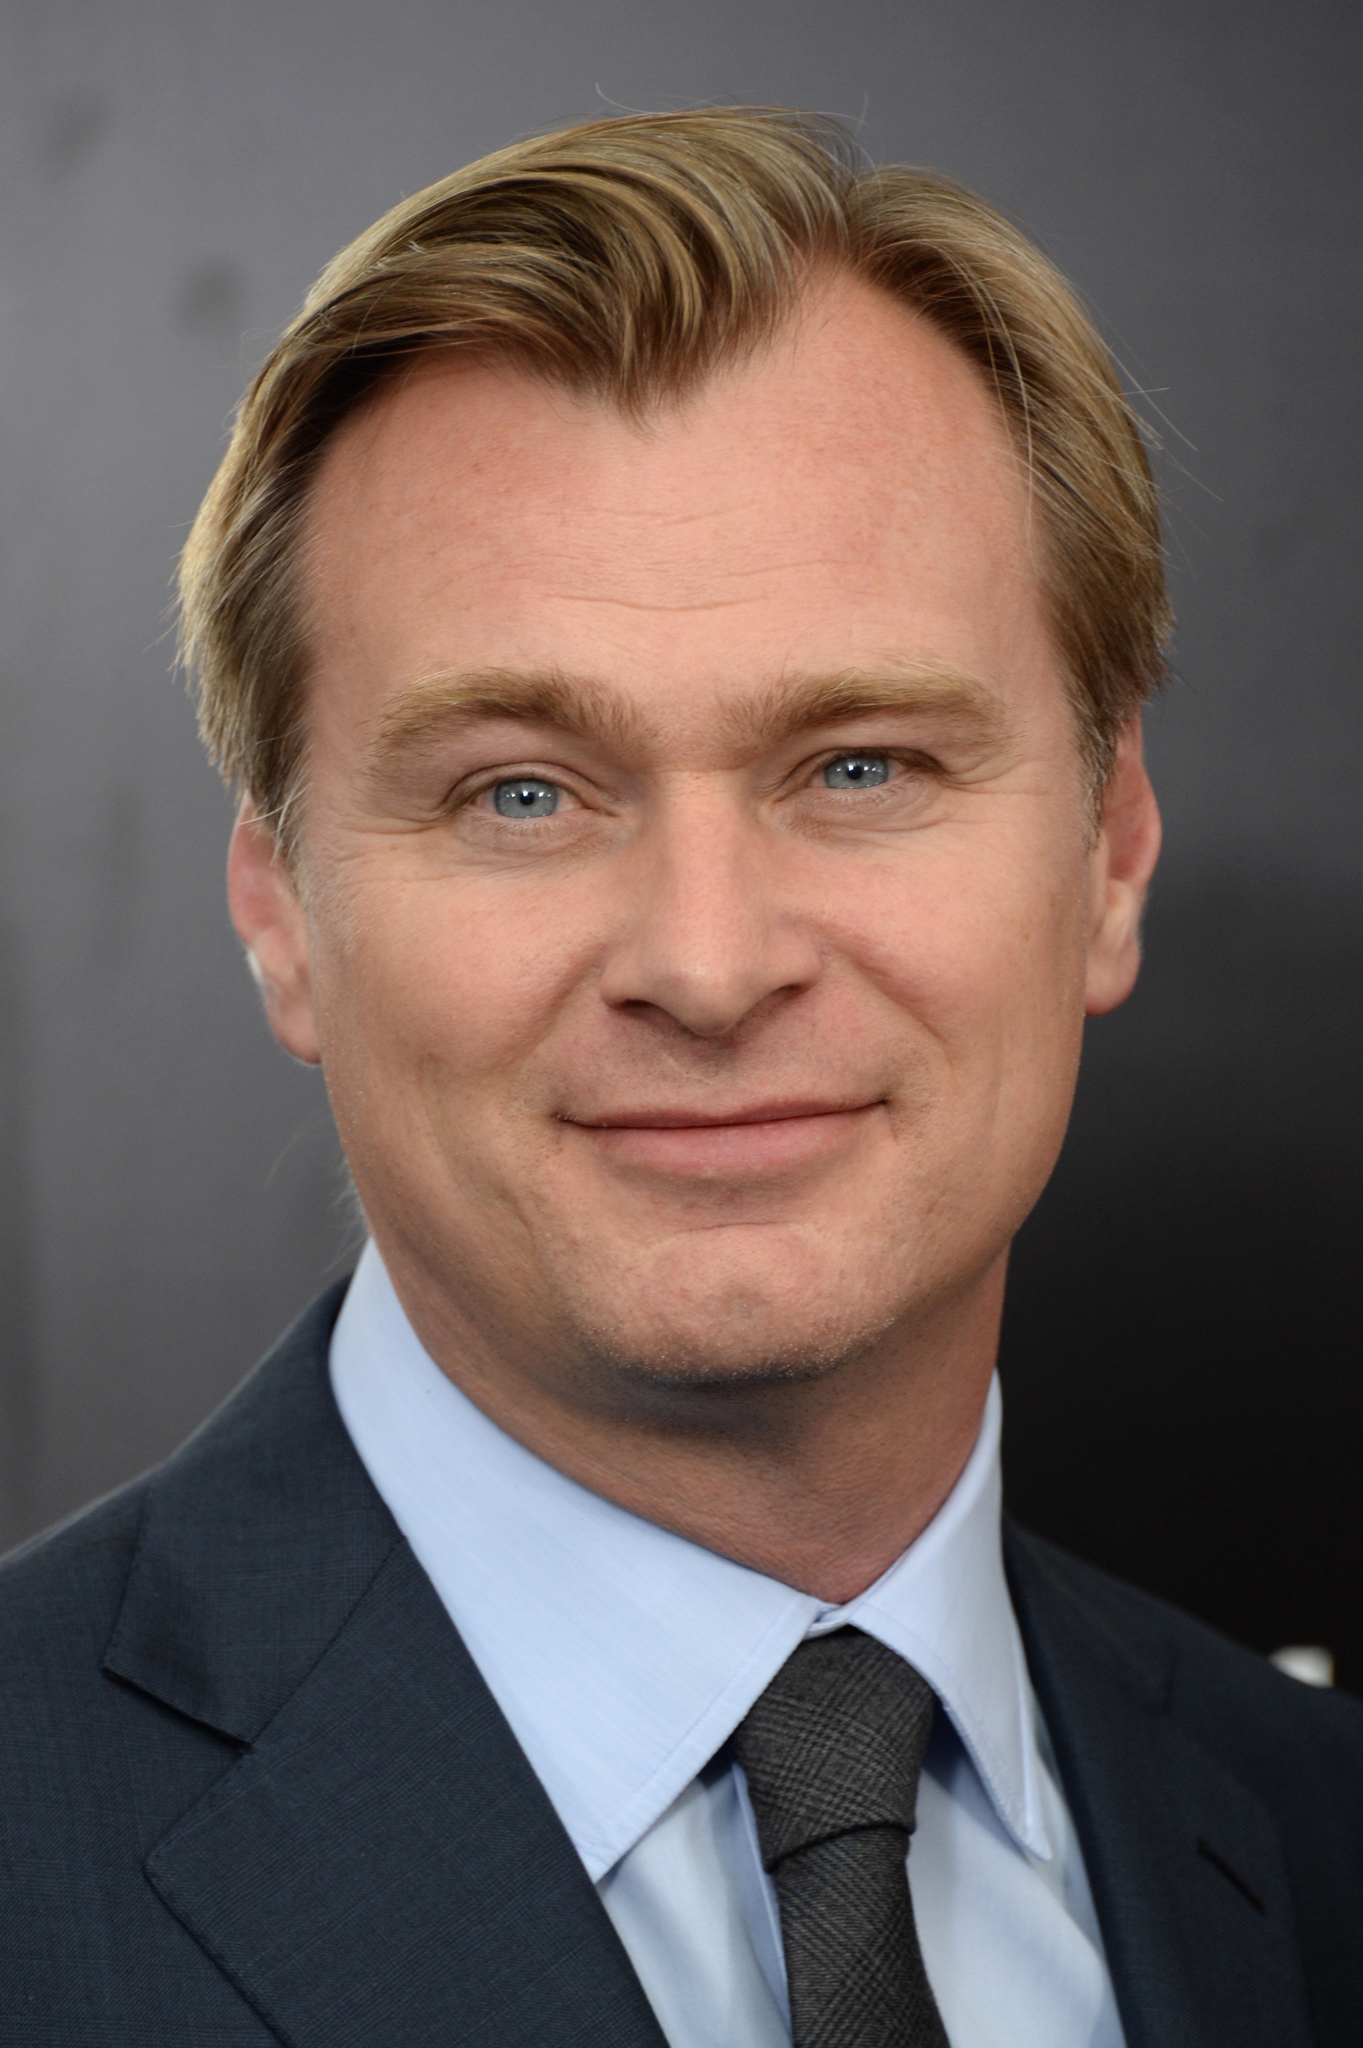 Christopher Nolan at event of Zmogus is plieno (2013)